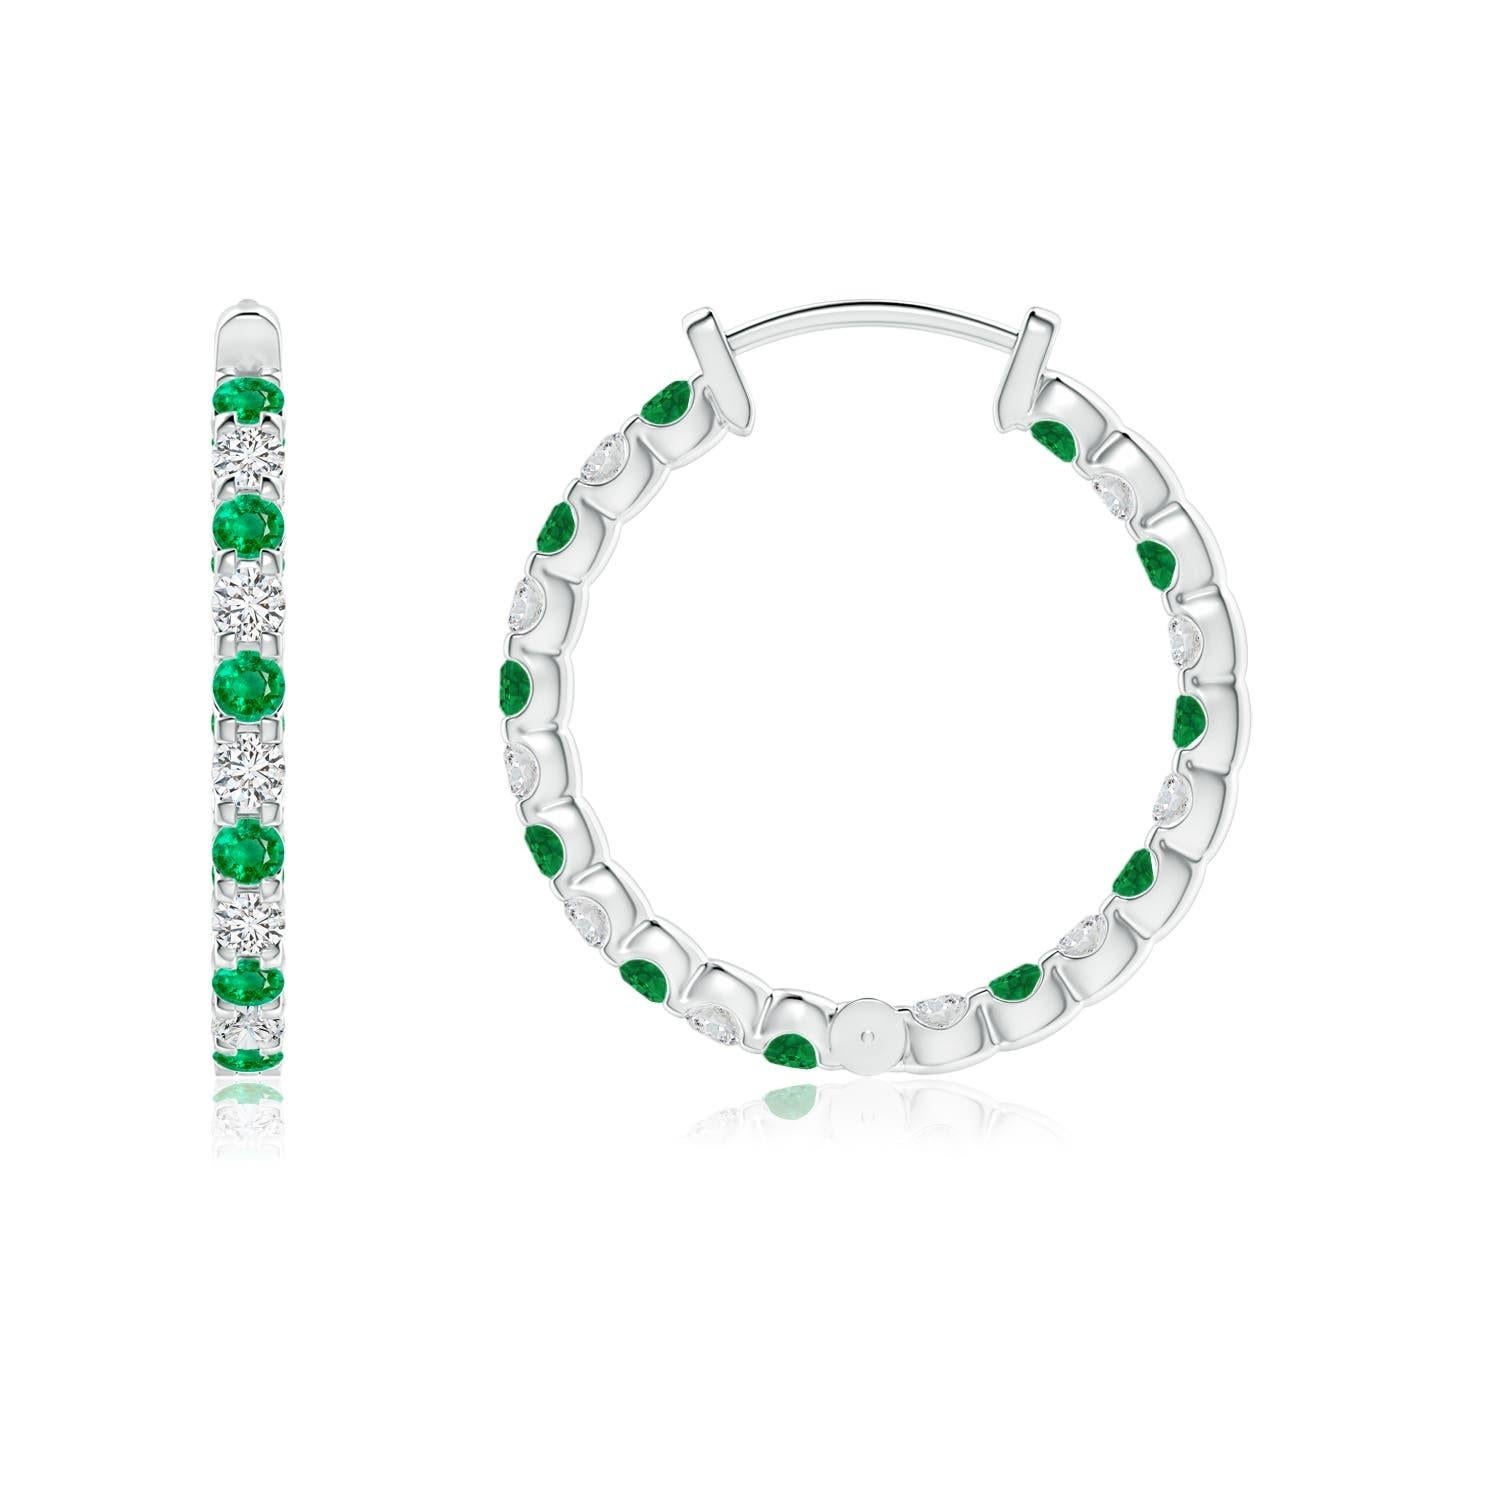 Alternately secured in prong settings are lush green emeralds and brilliant diamonds on these stunning hoop earrings. The scintillating gems are embellished on the outside as well as the inside of these platinum hoops, showcasing a striking contrast